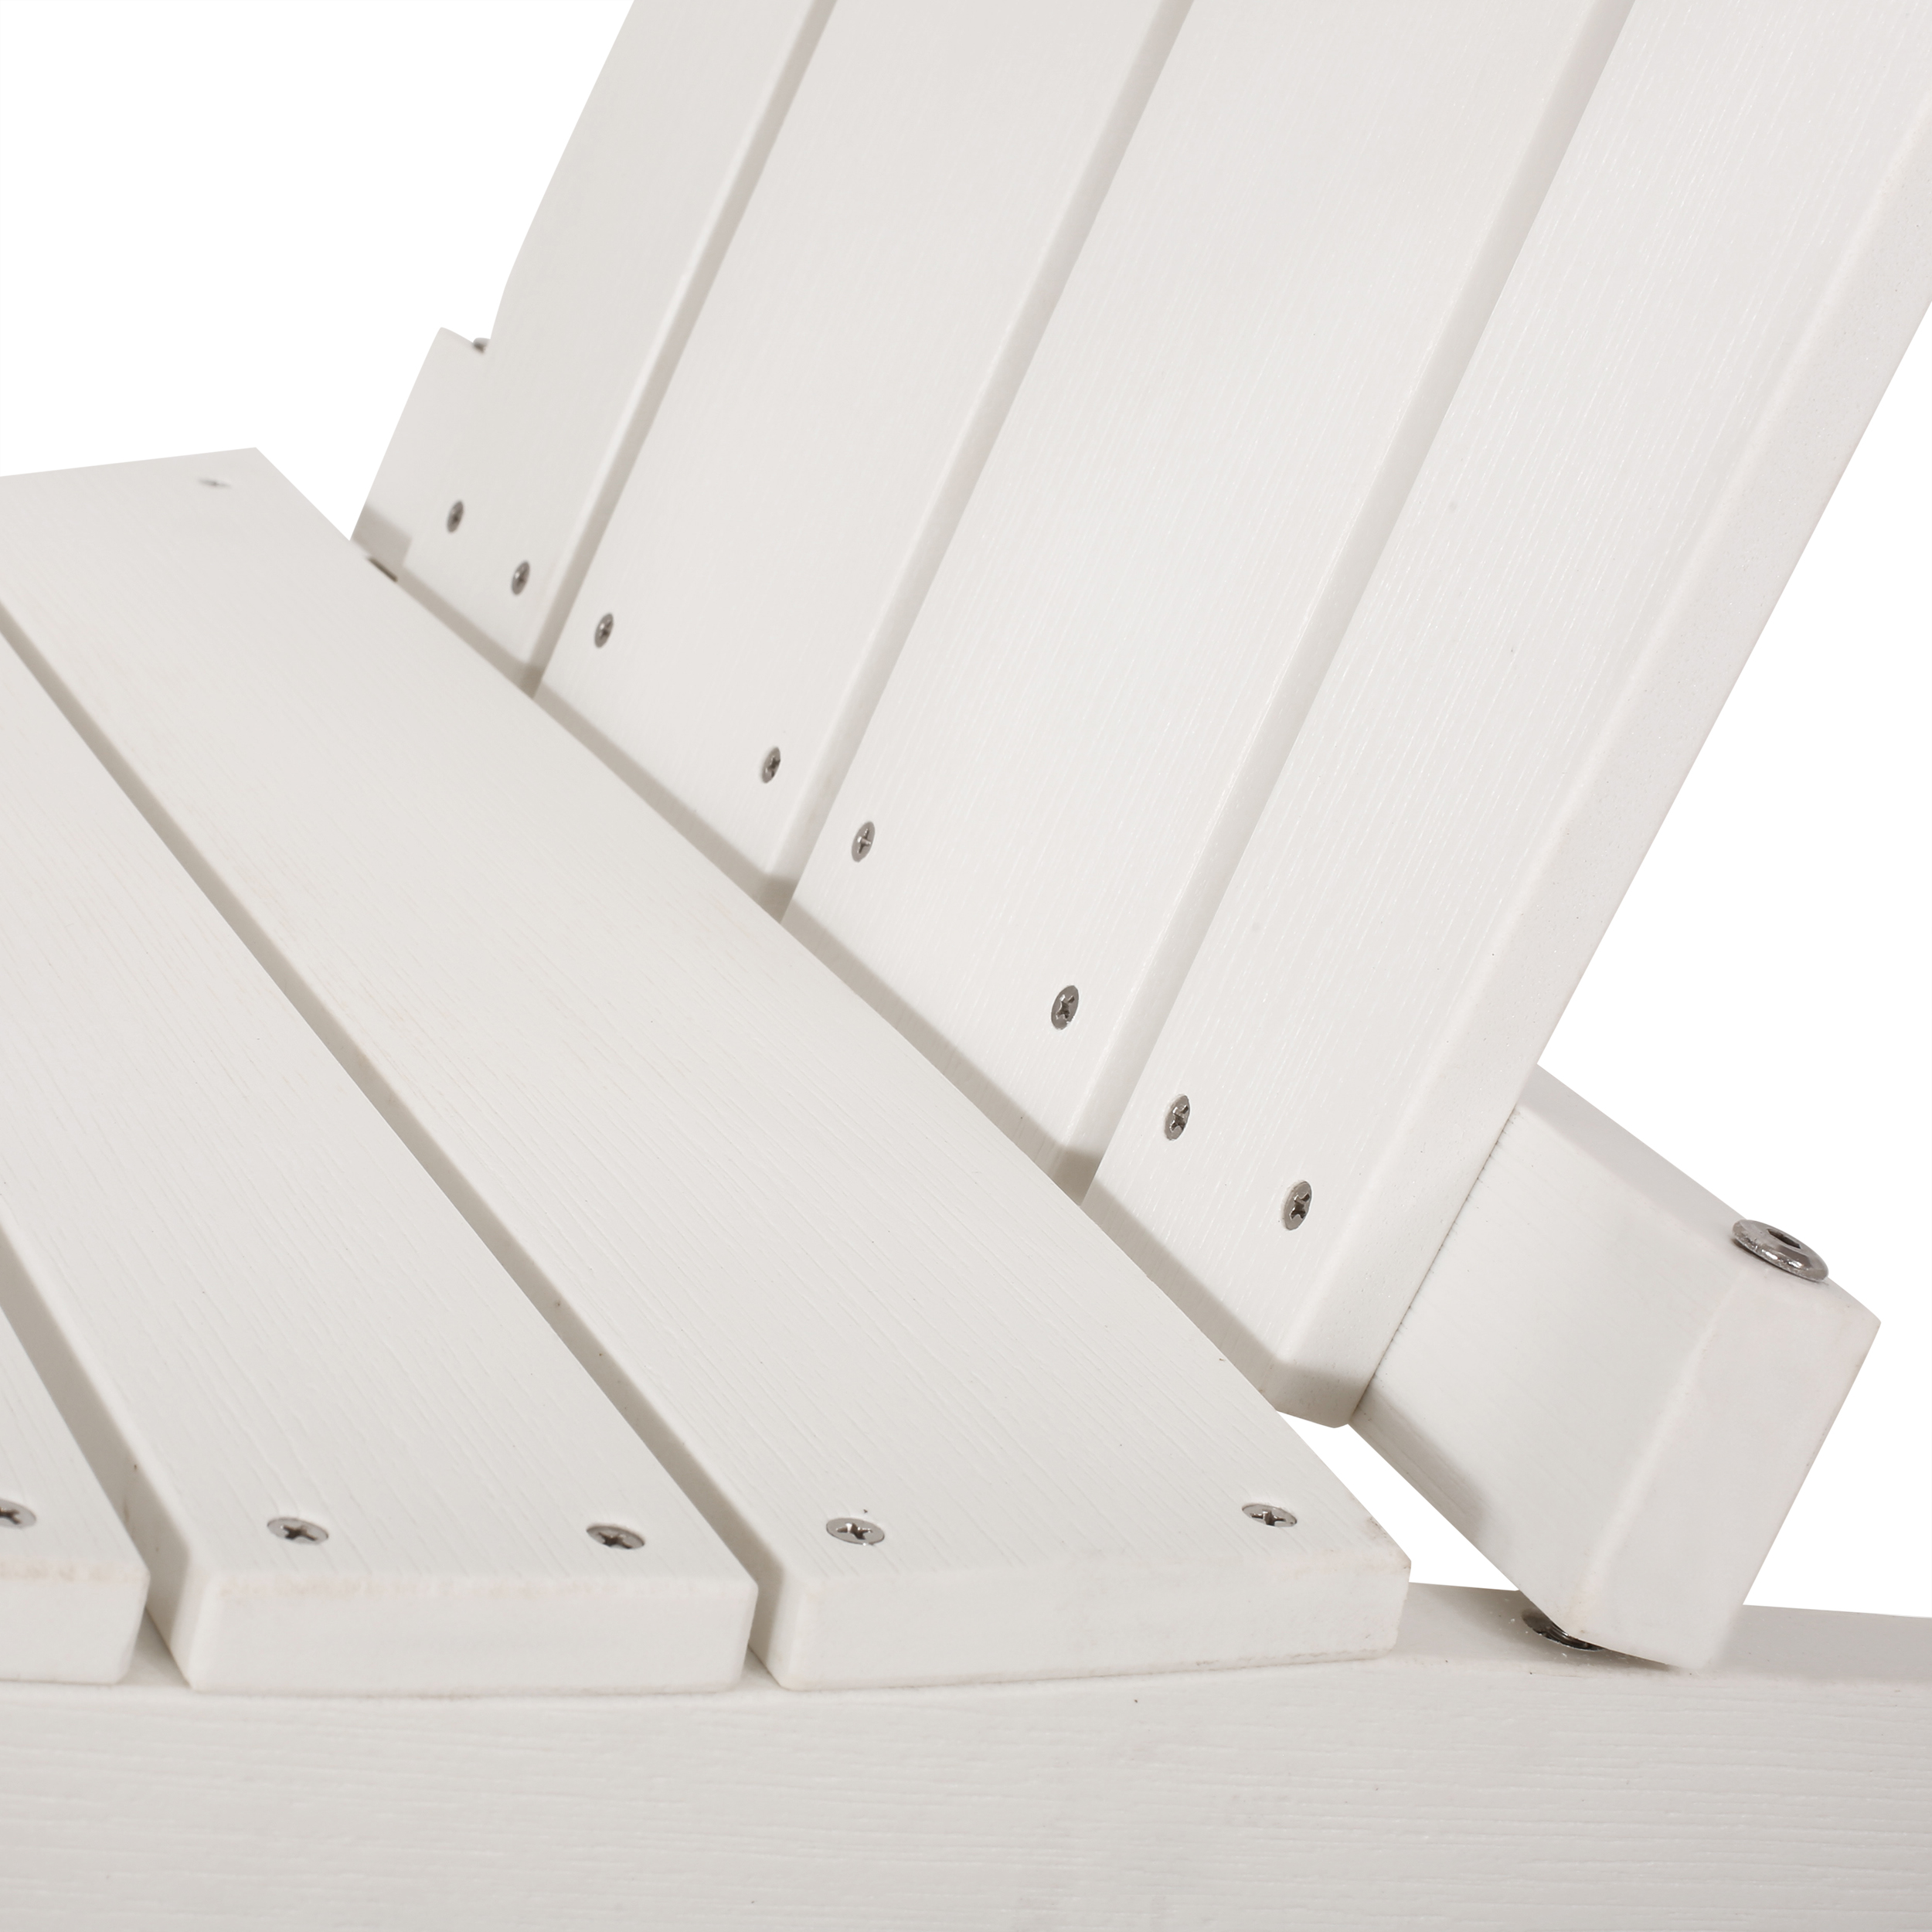 Noble House Culver Faux Wood Slat-Backed Adirondack Chair in White (Set of 2) - image 5 of 7